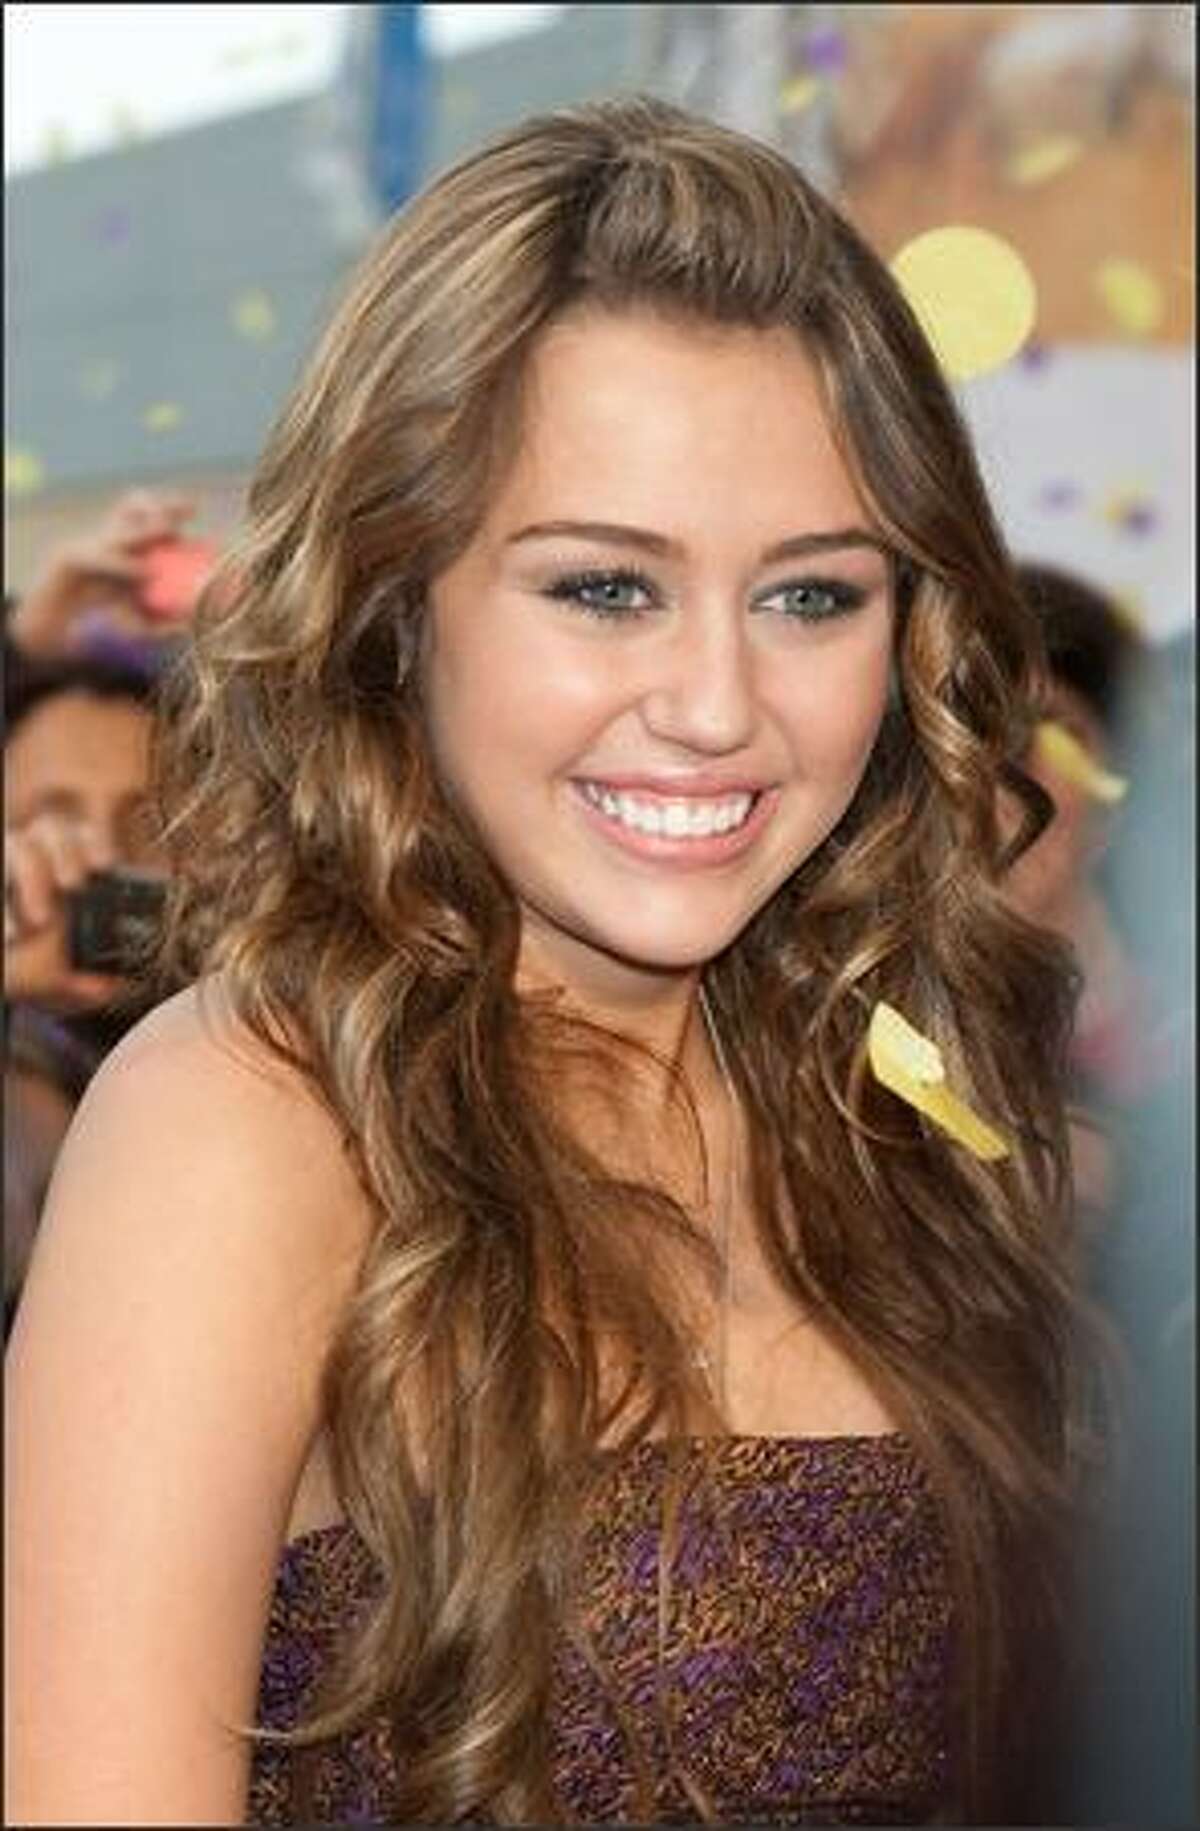 Actress Miley Cyrus attends 'Hannah Montana: The Movie' premiere in Rome, Italy.